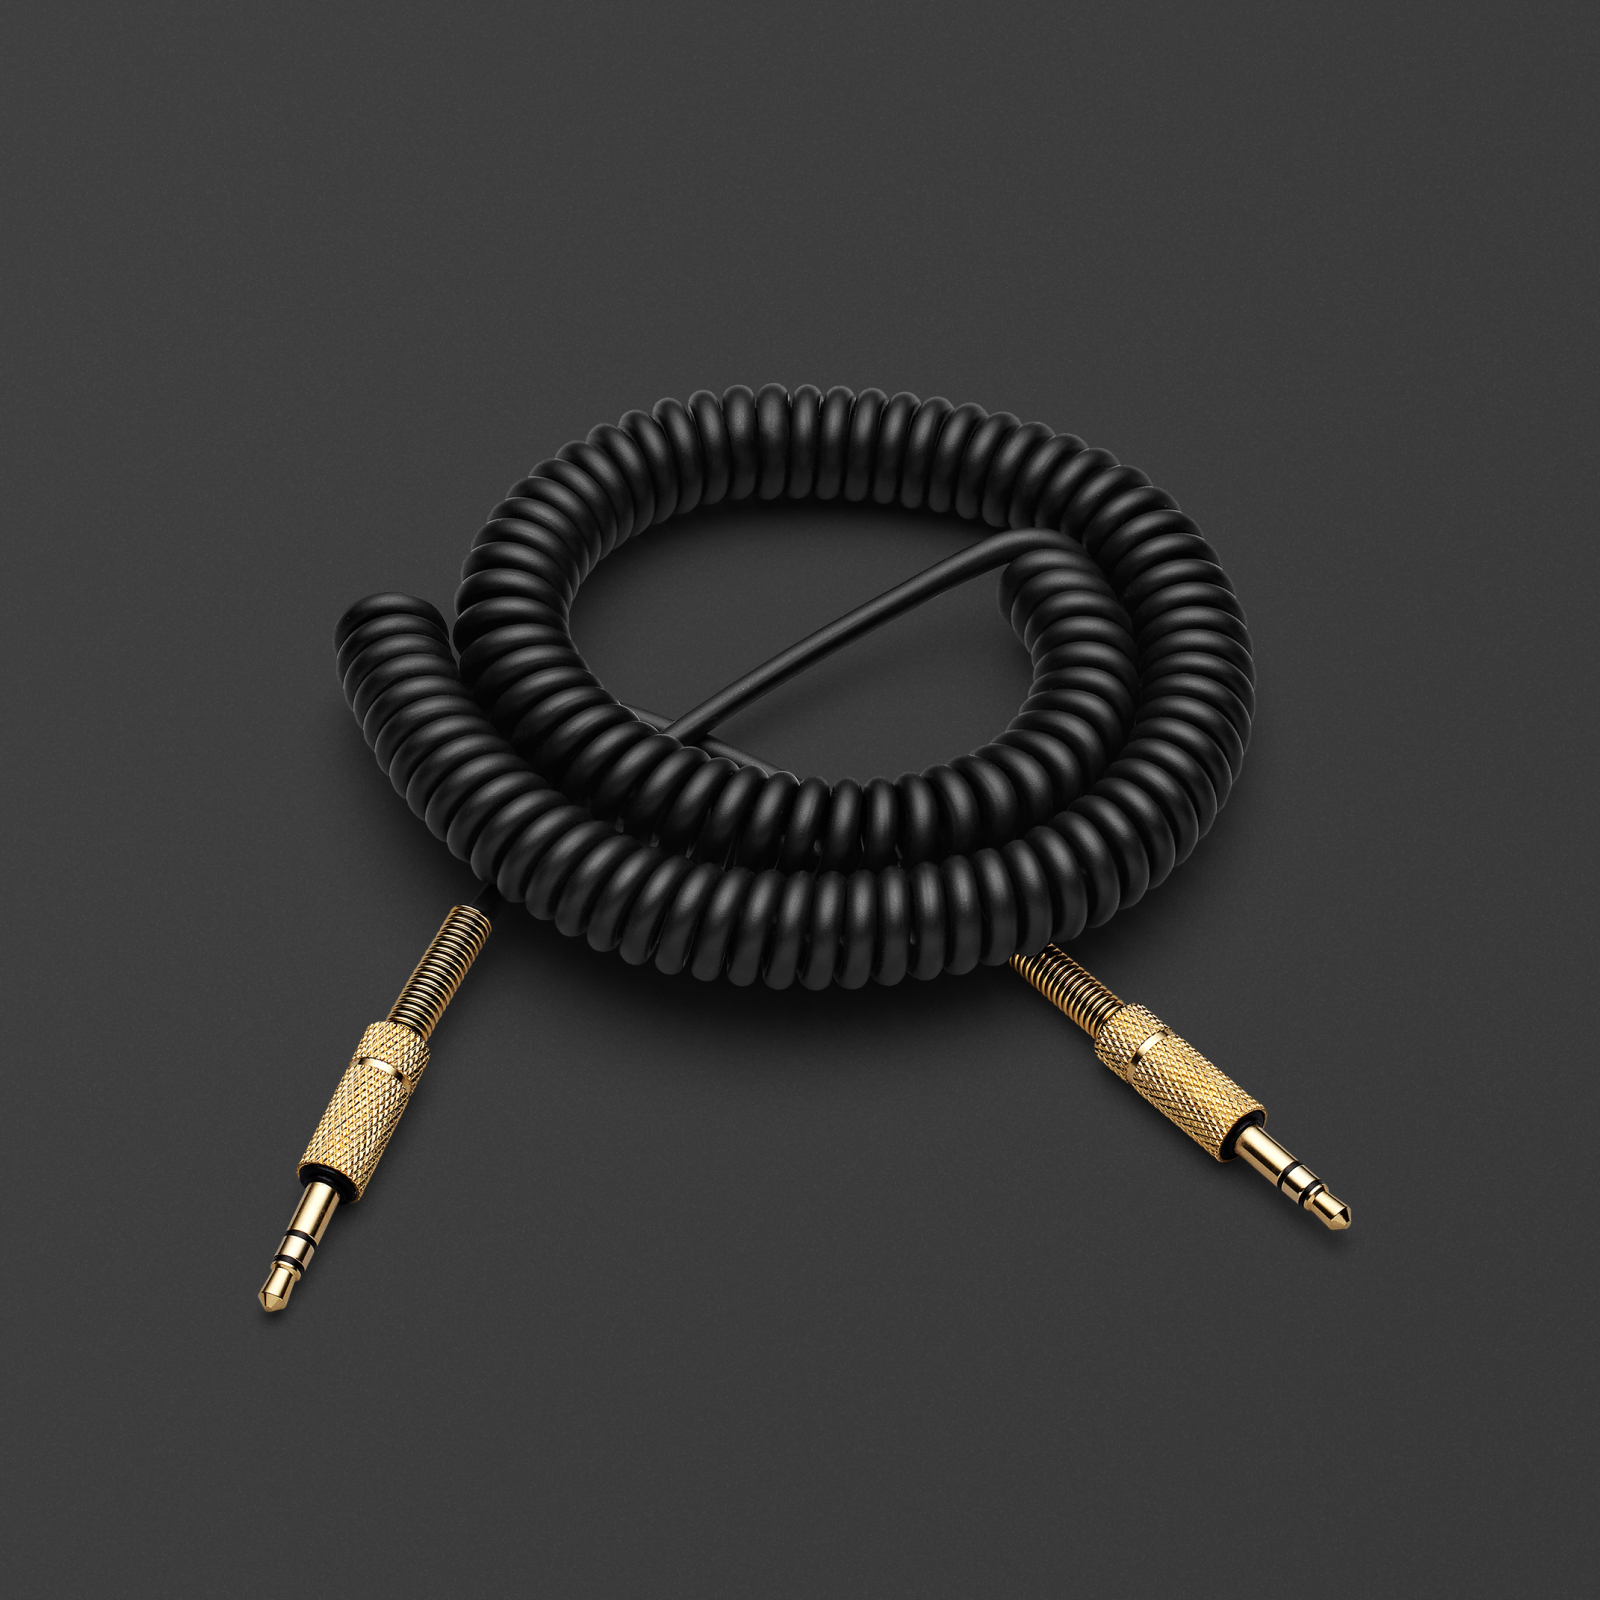 A Marshall black coiled audio cable.